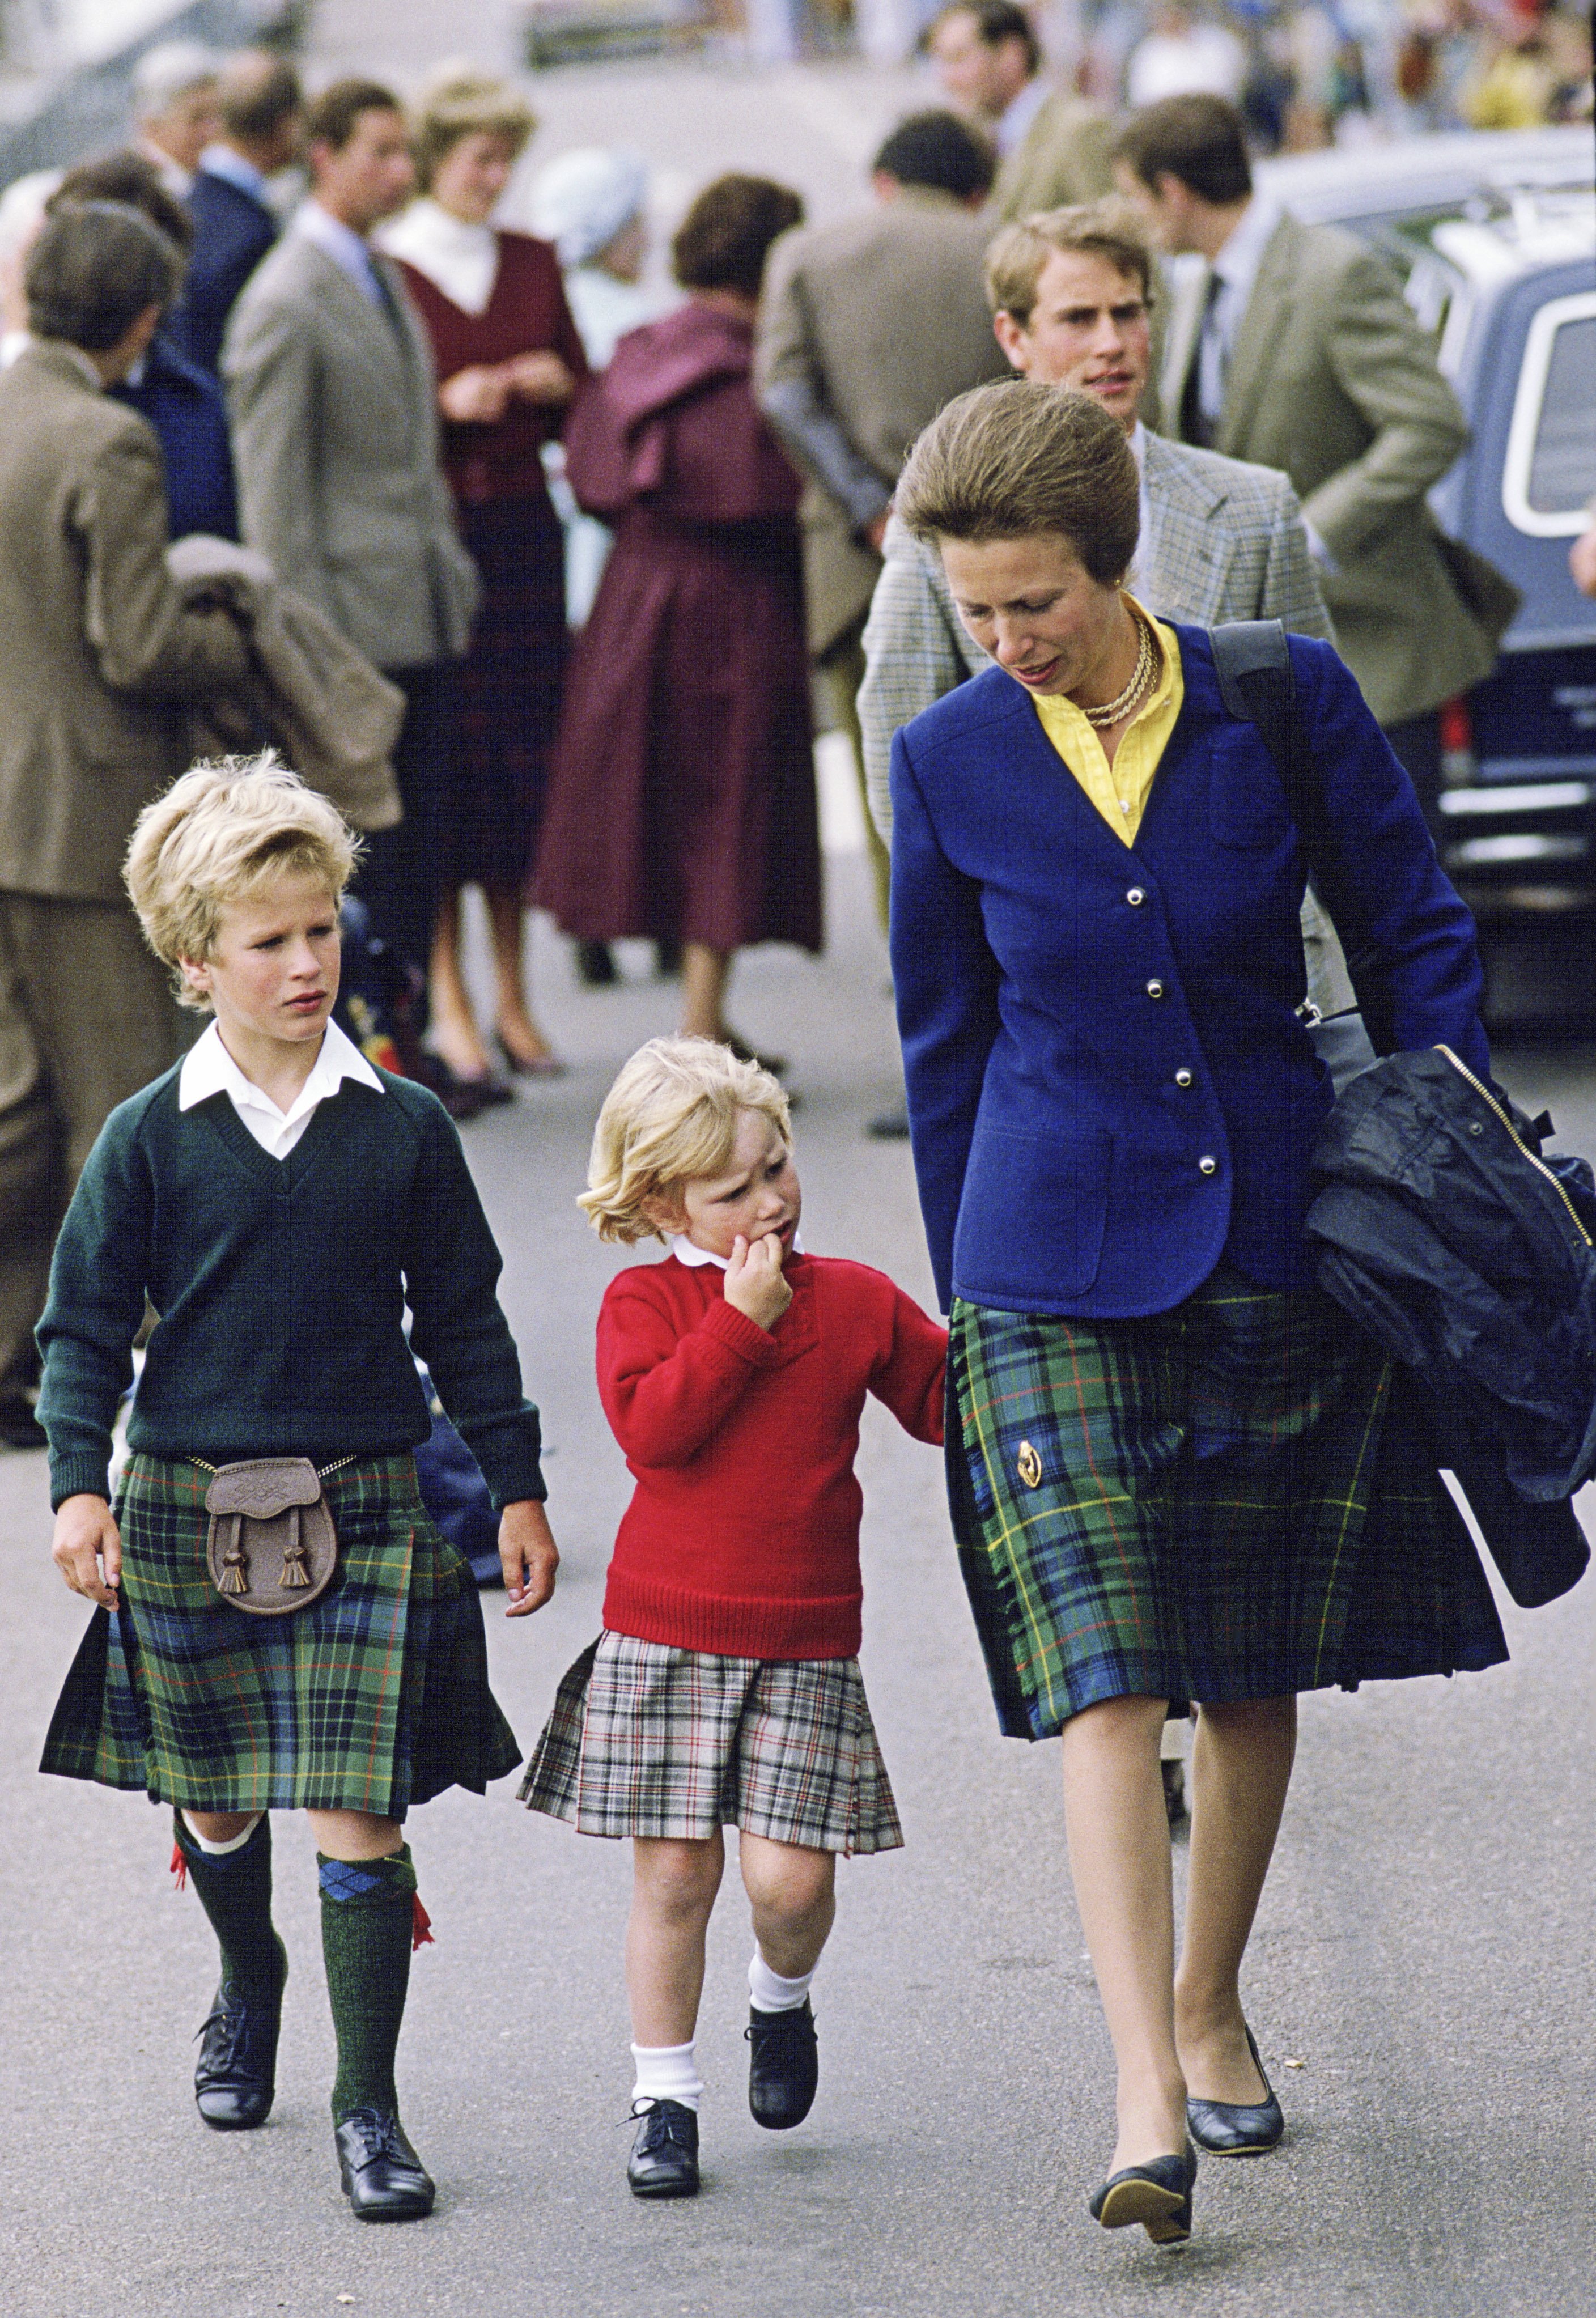 Princess Anne with her children Zara and Peter Phillips. | Source: Getty Images